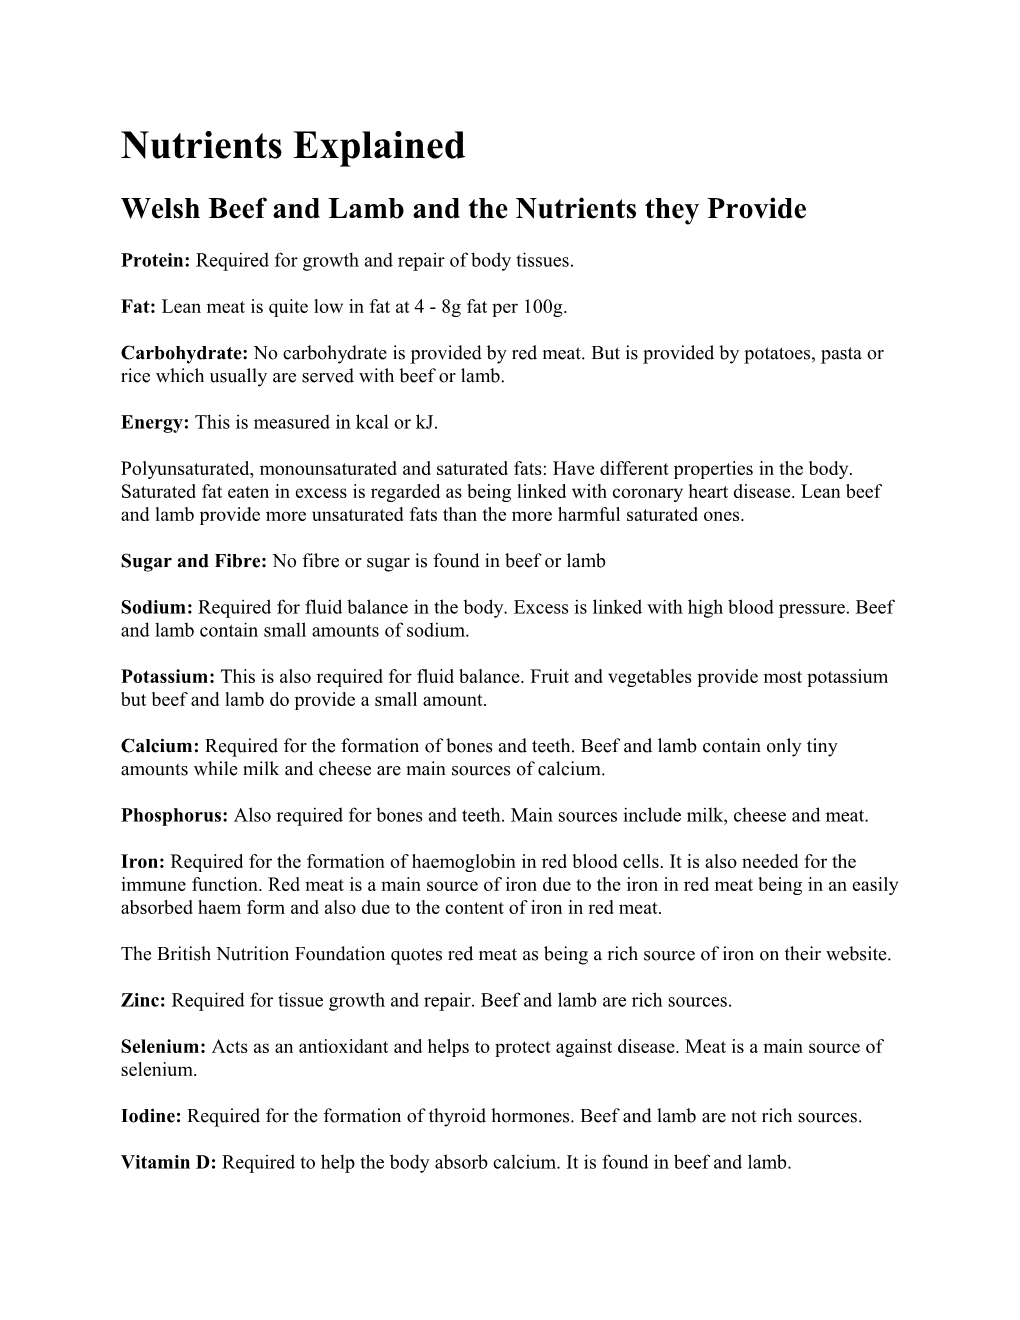 Welsh Beef and Lamb and the Nutrients They Provide